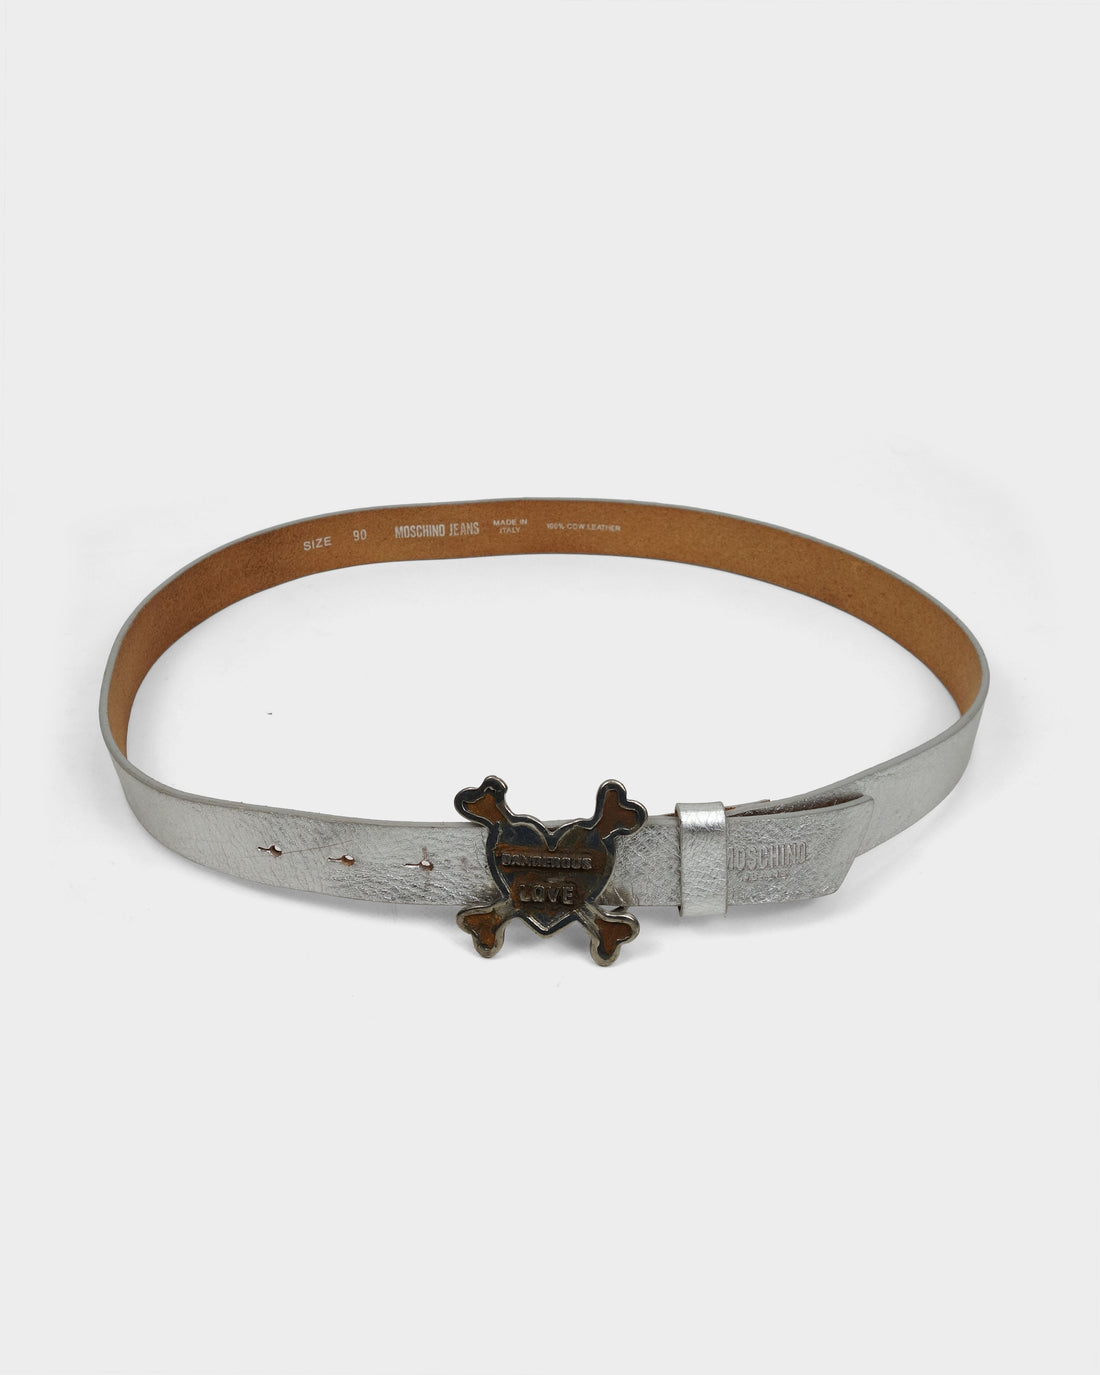 Moschino Skull Heart Silver Leather Belt 2000's